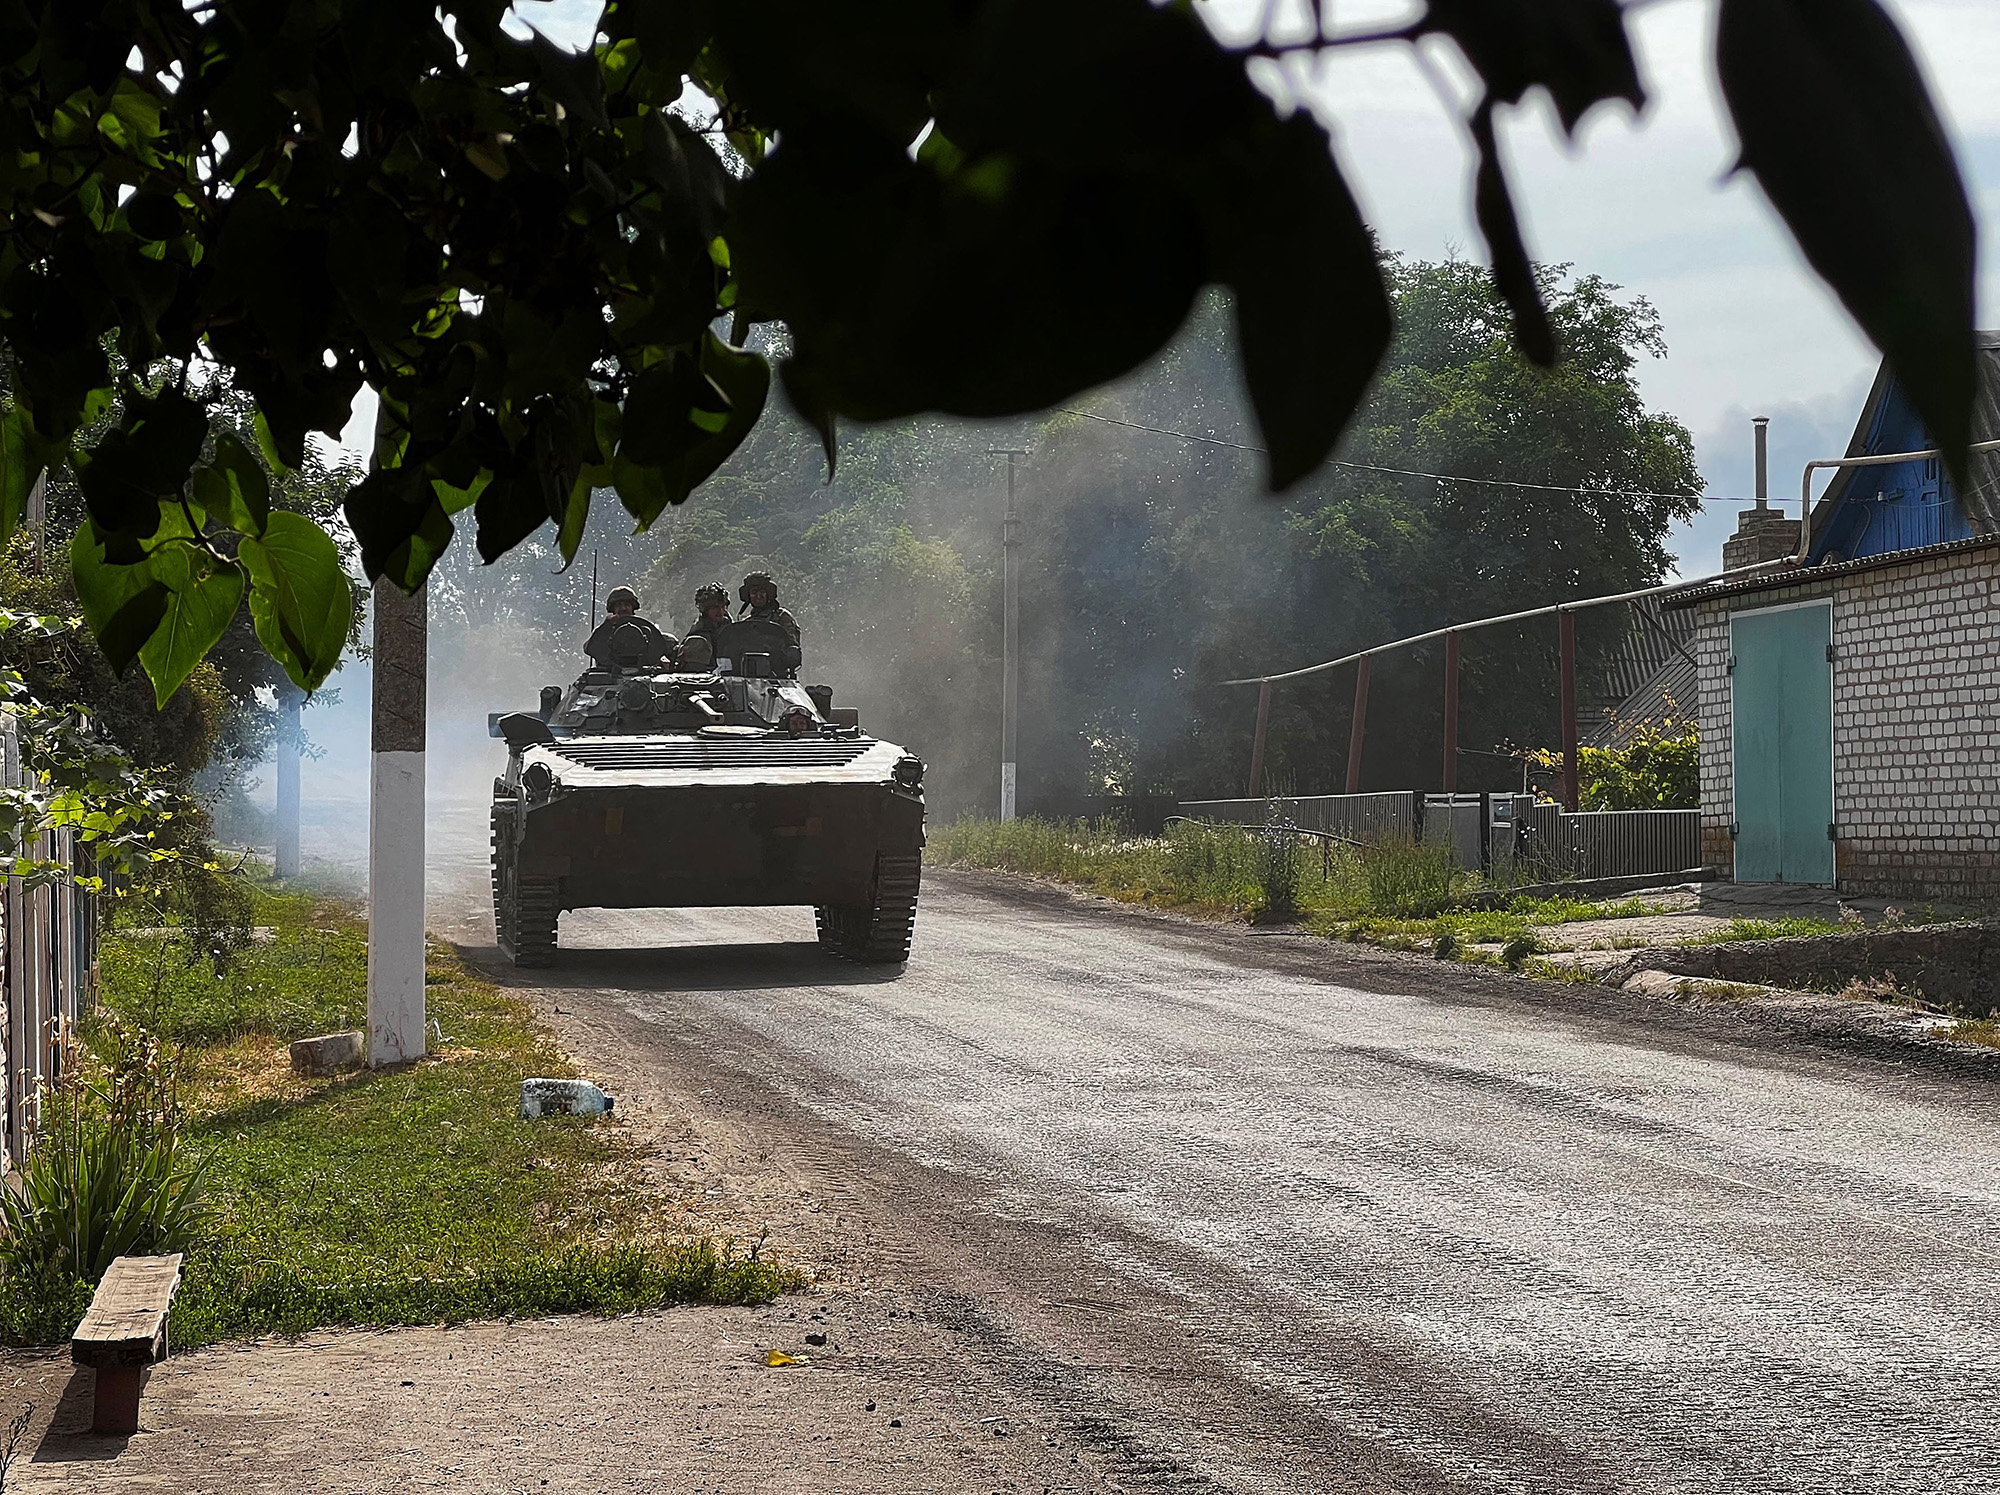 Ukrainian soldiers ride an armoured vehicle on the main road to Lysychansk in the eastern Ukrainian region of Donbas on June 26.